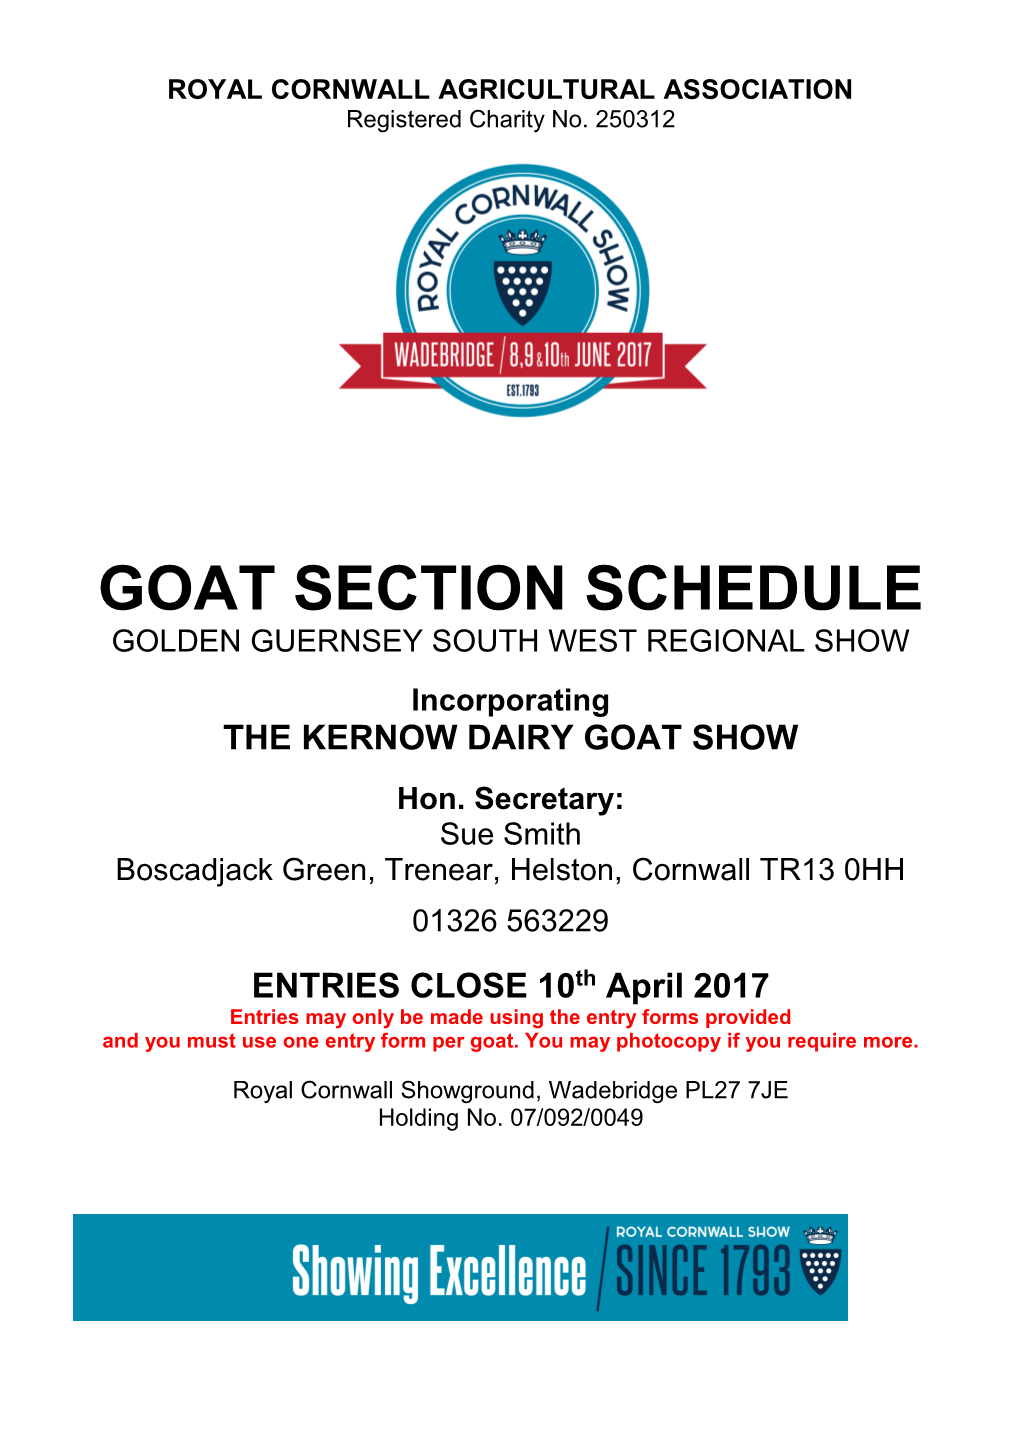 Goat Section Schedule Golden Guernsey South West Regional Show